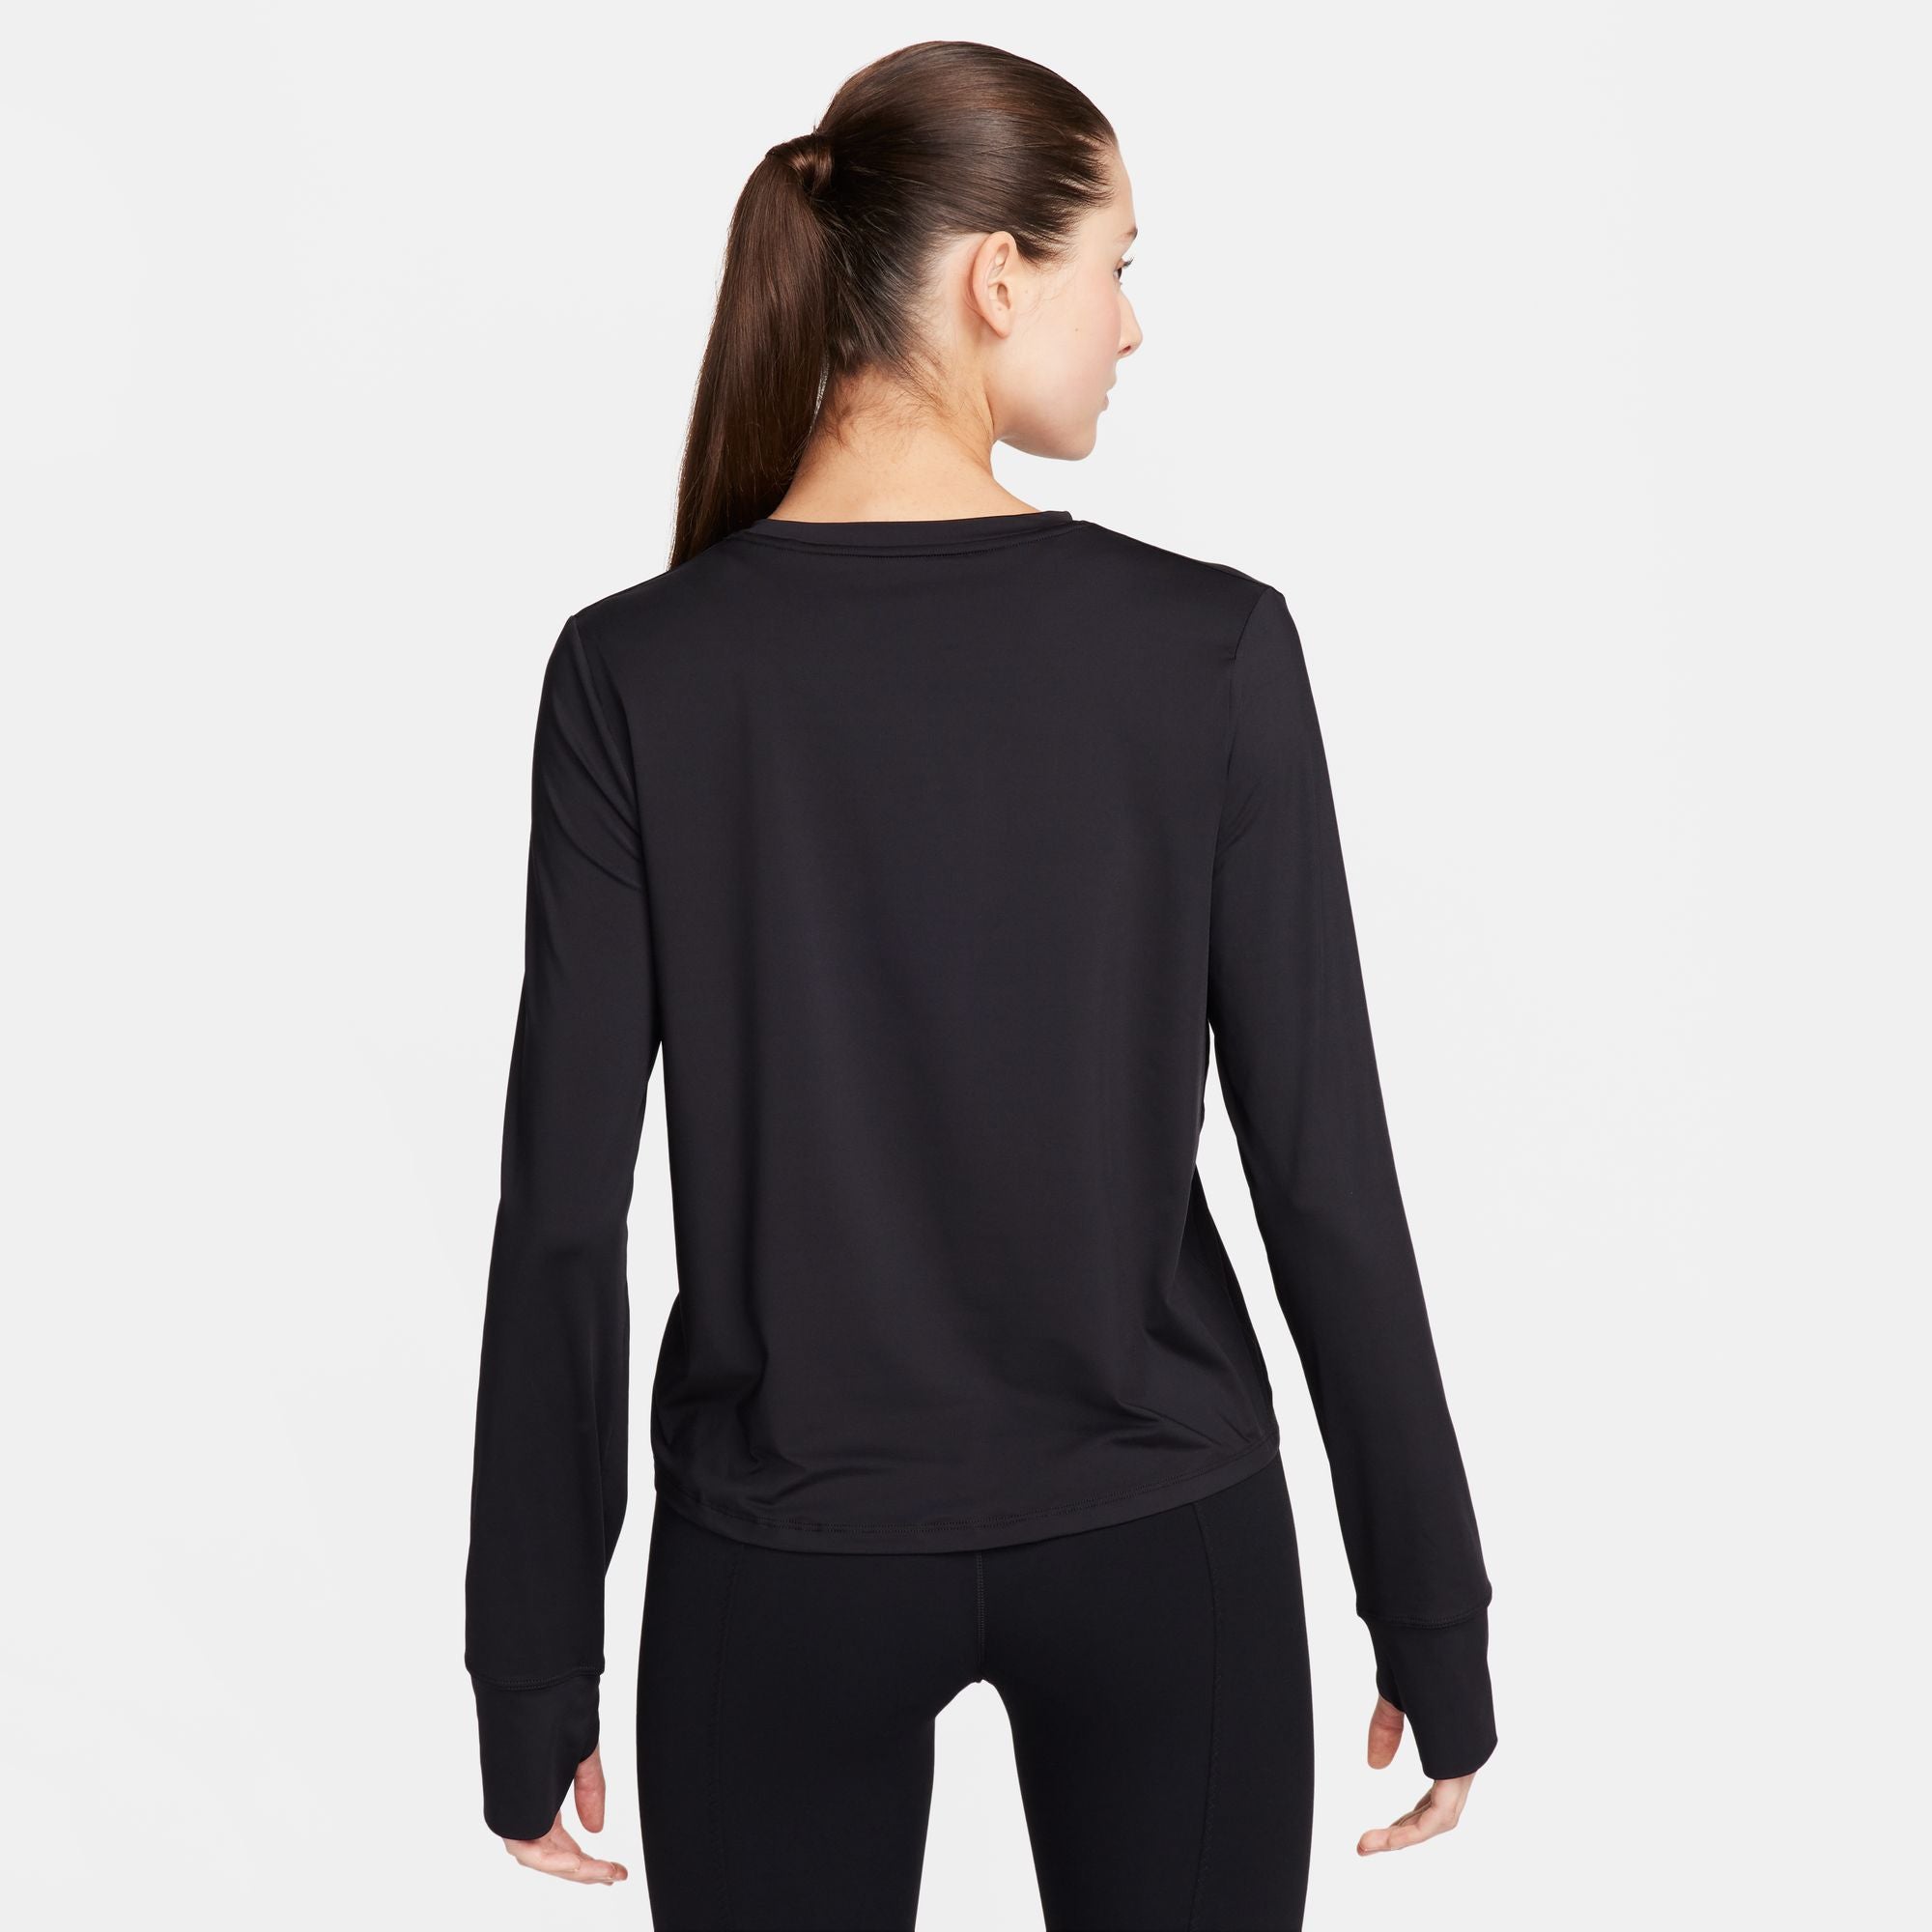 FOREYOND Plus Size Women's Long Sleeve Workout Shirts Tops Loose Fit  Activewear Quick Dry Athletic Running Pullover, Black, 1X at  Women's  Clothing store